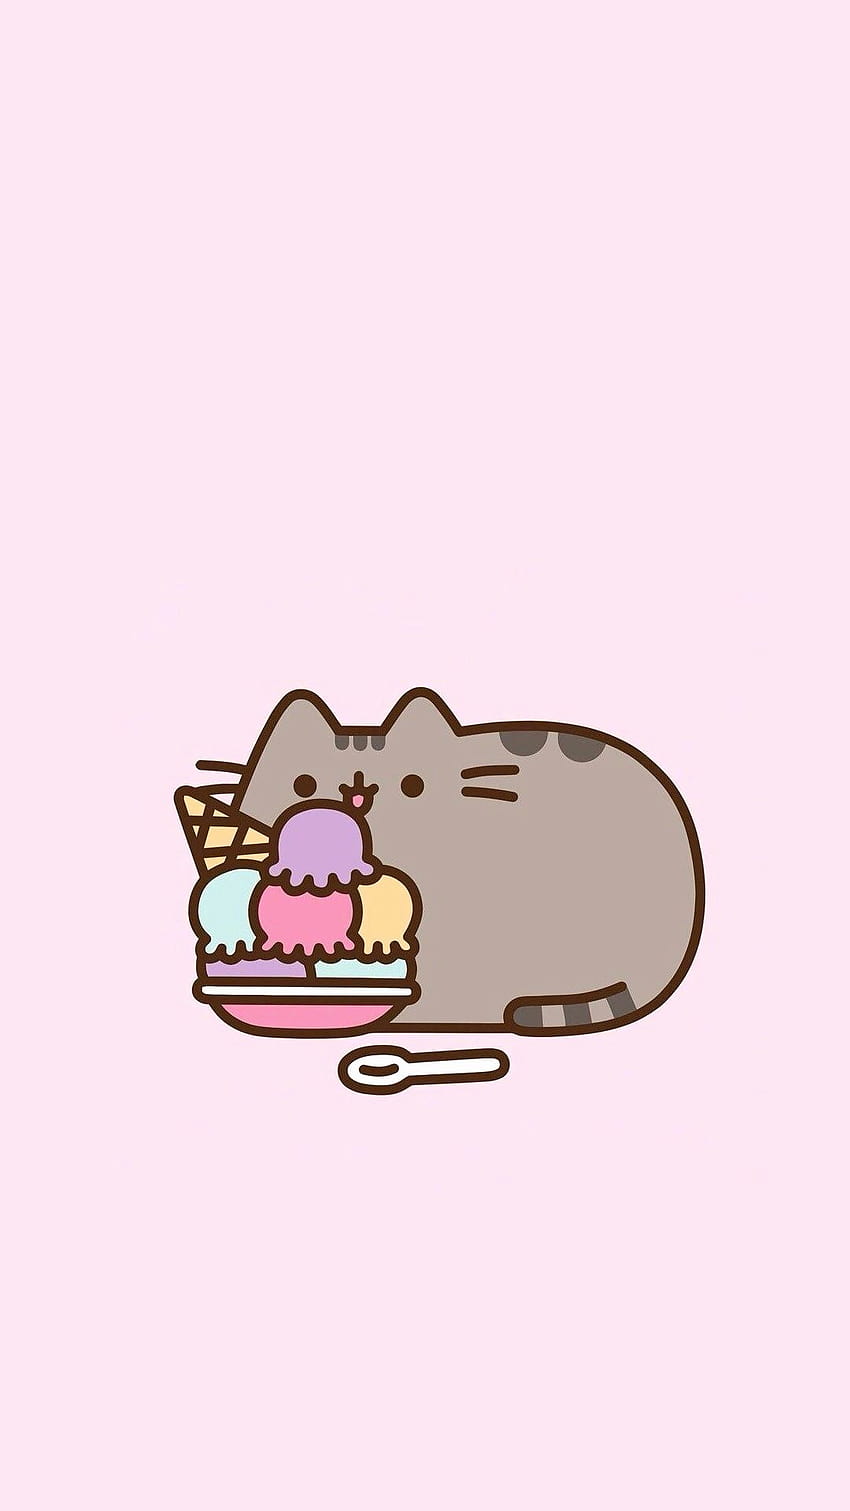 Pusheen Awesome Pusheen and Stormy Building Snowcat Replicas Of Each Other ⛄ Adorable Amimals This Month HD phone wallpaper